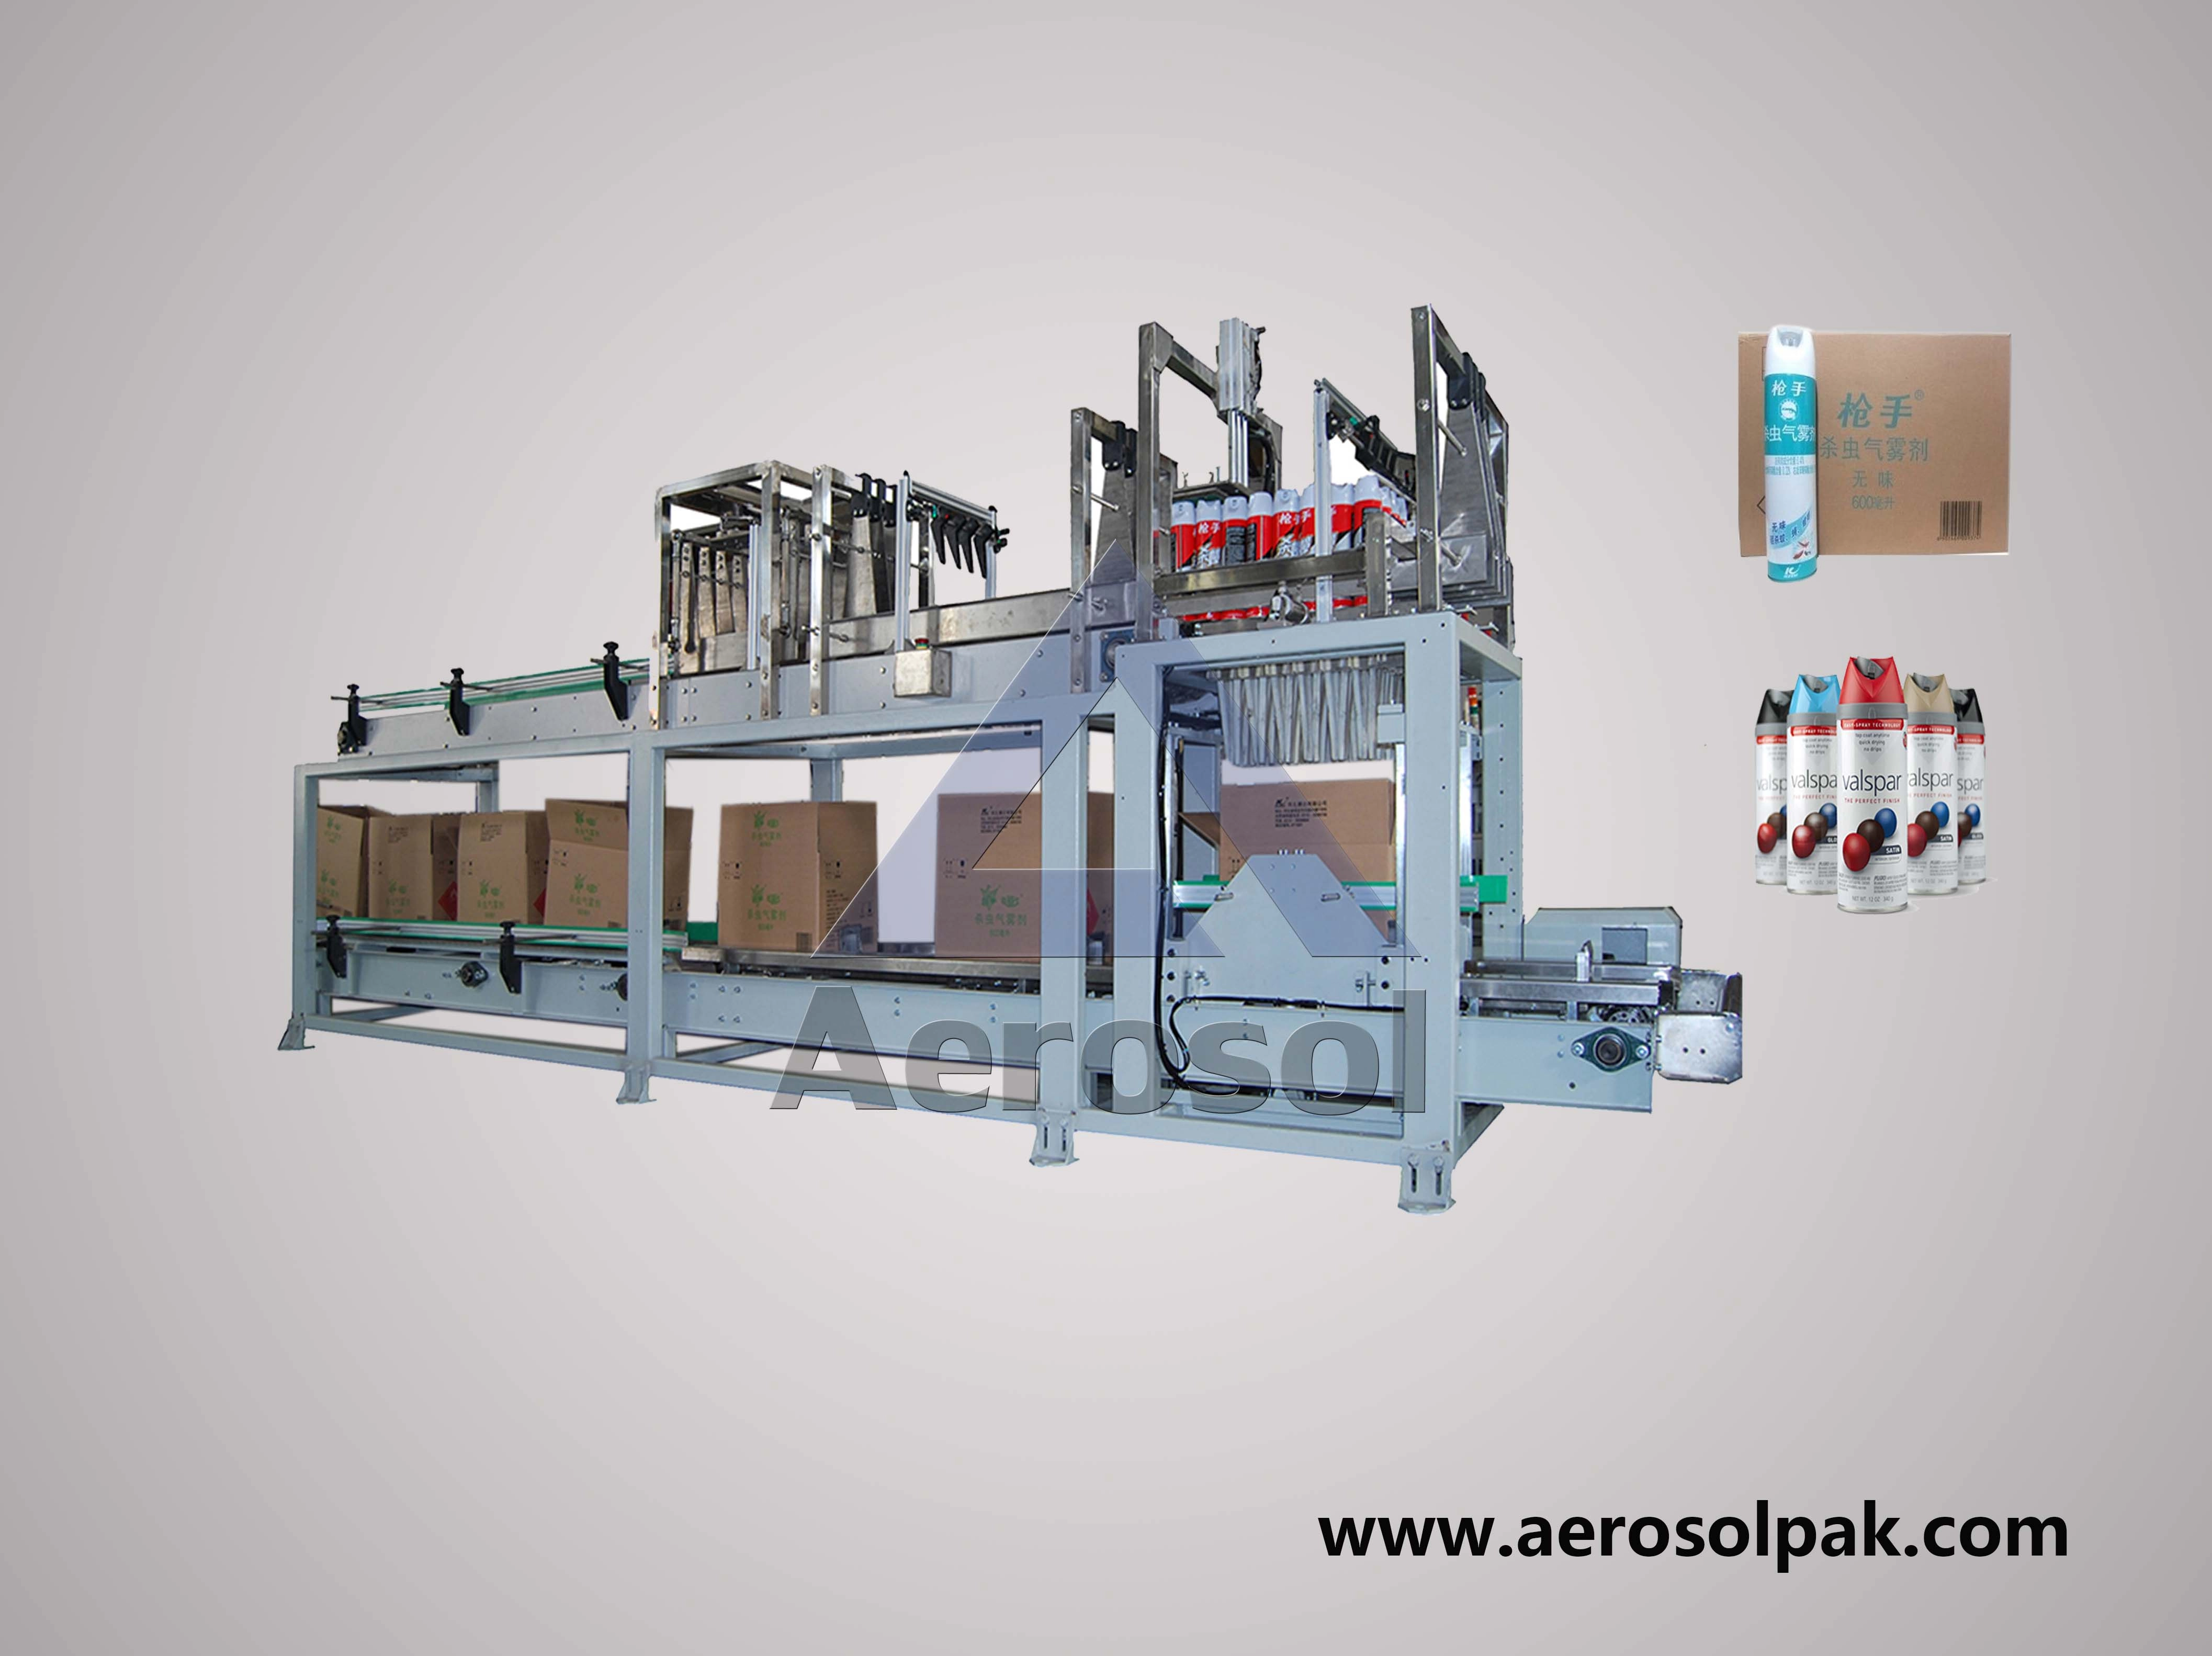 Case Packing Machine For Aerosol Cans